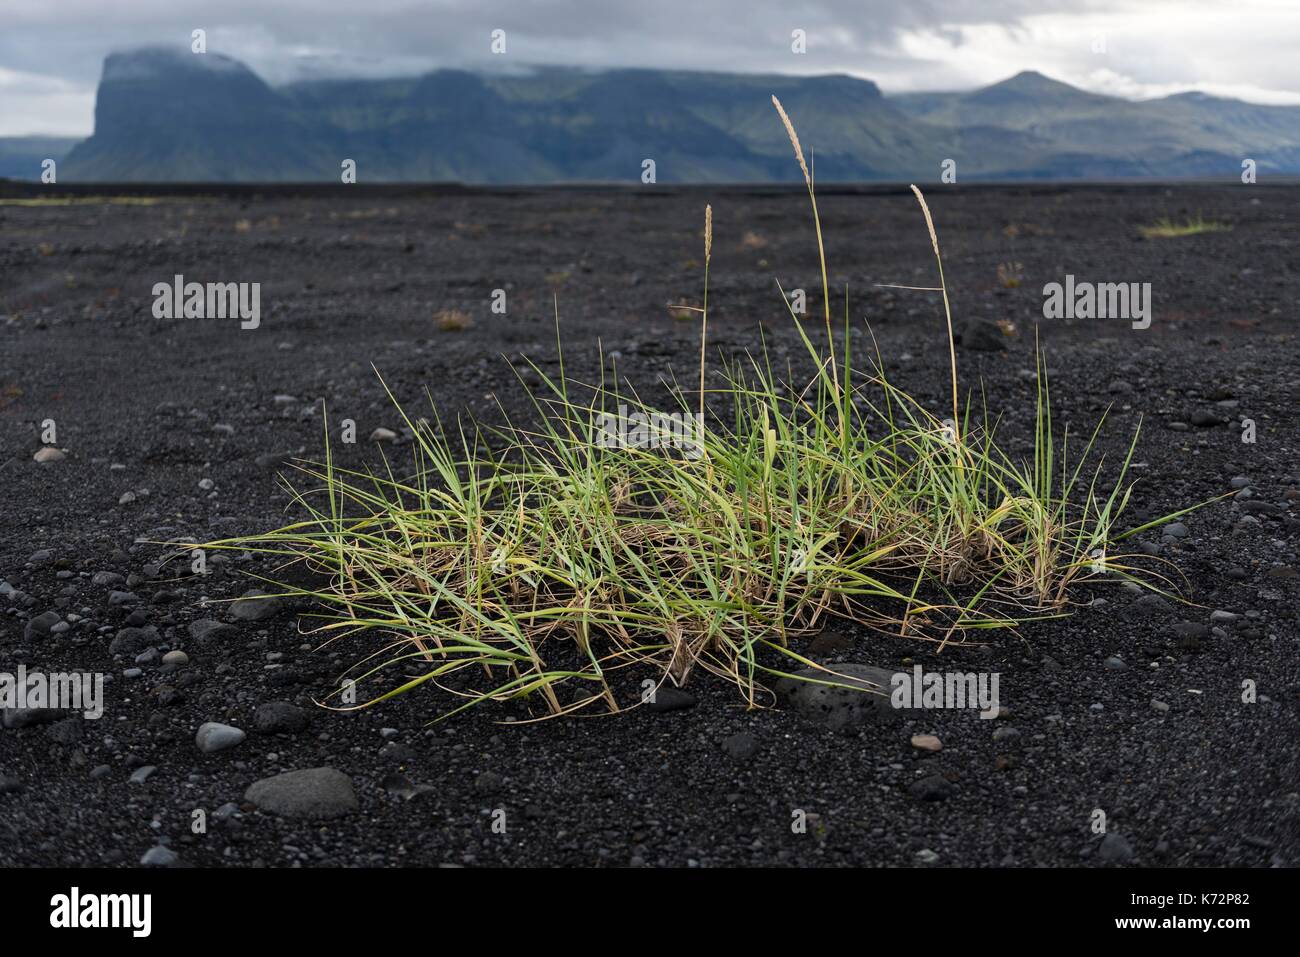 Iceland, South Iceland, grass in the sand (Leymus arenarius), Lomagnupur mountain in the background Stock Photo